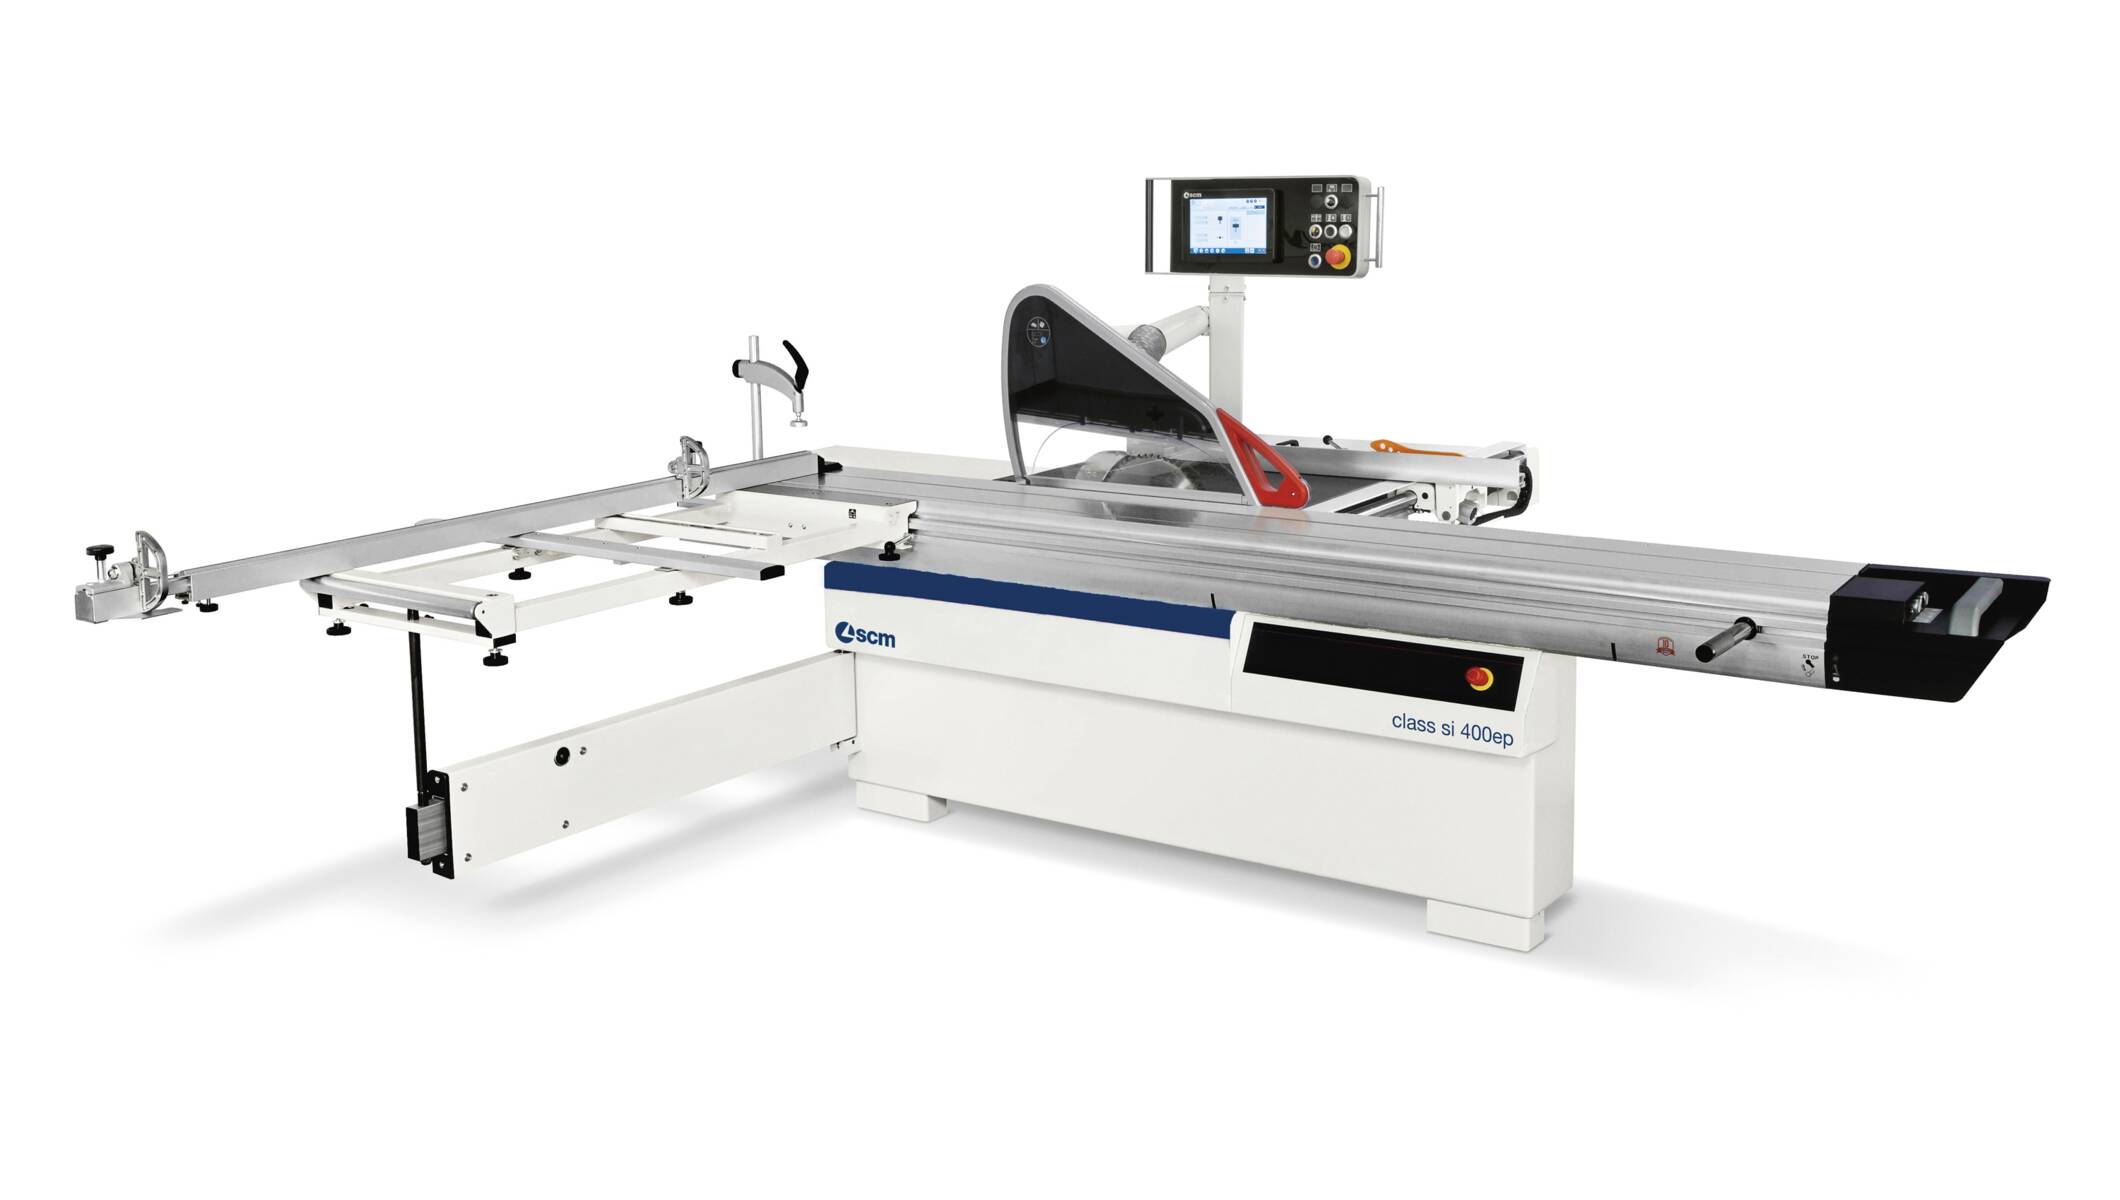 Joinery machines - Sliding table saws - class si 400ep